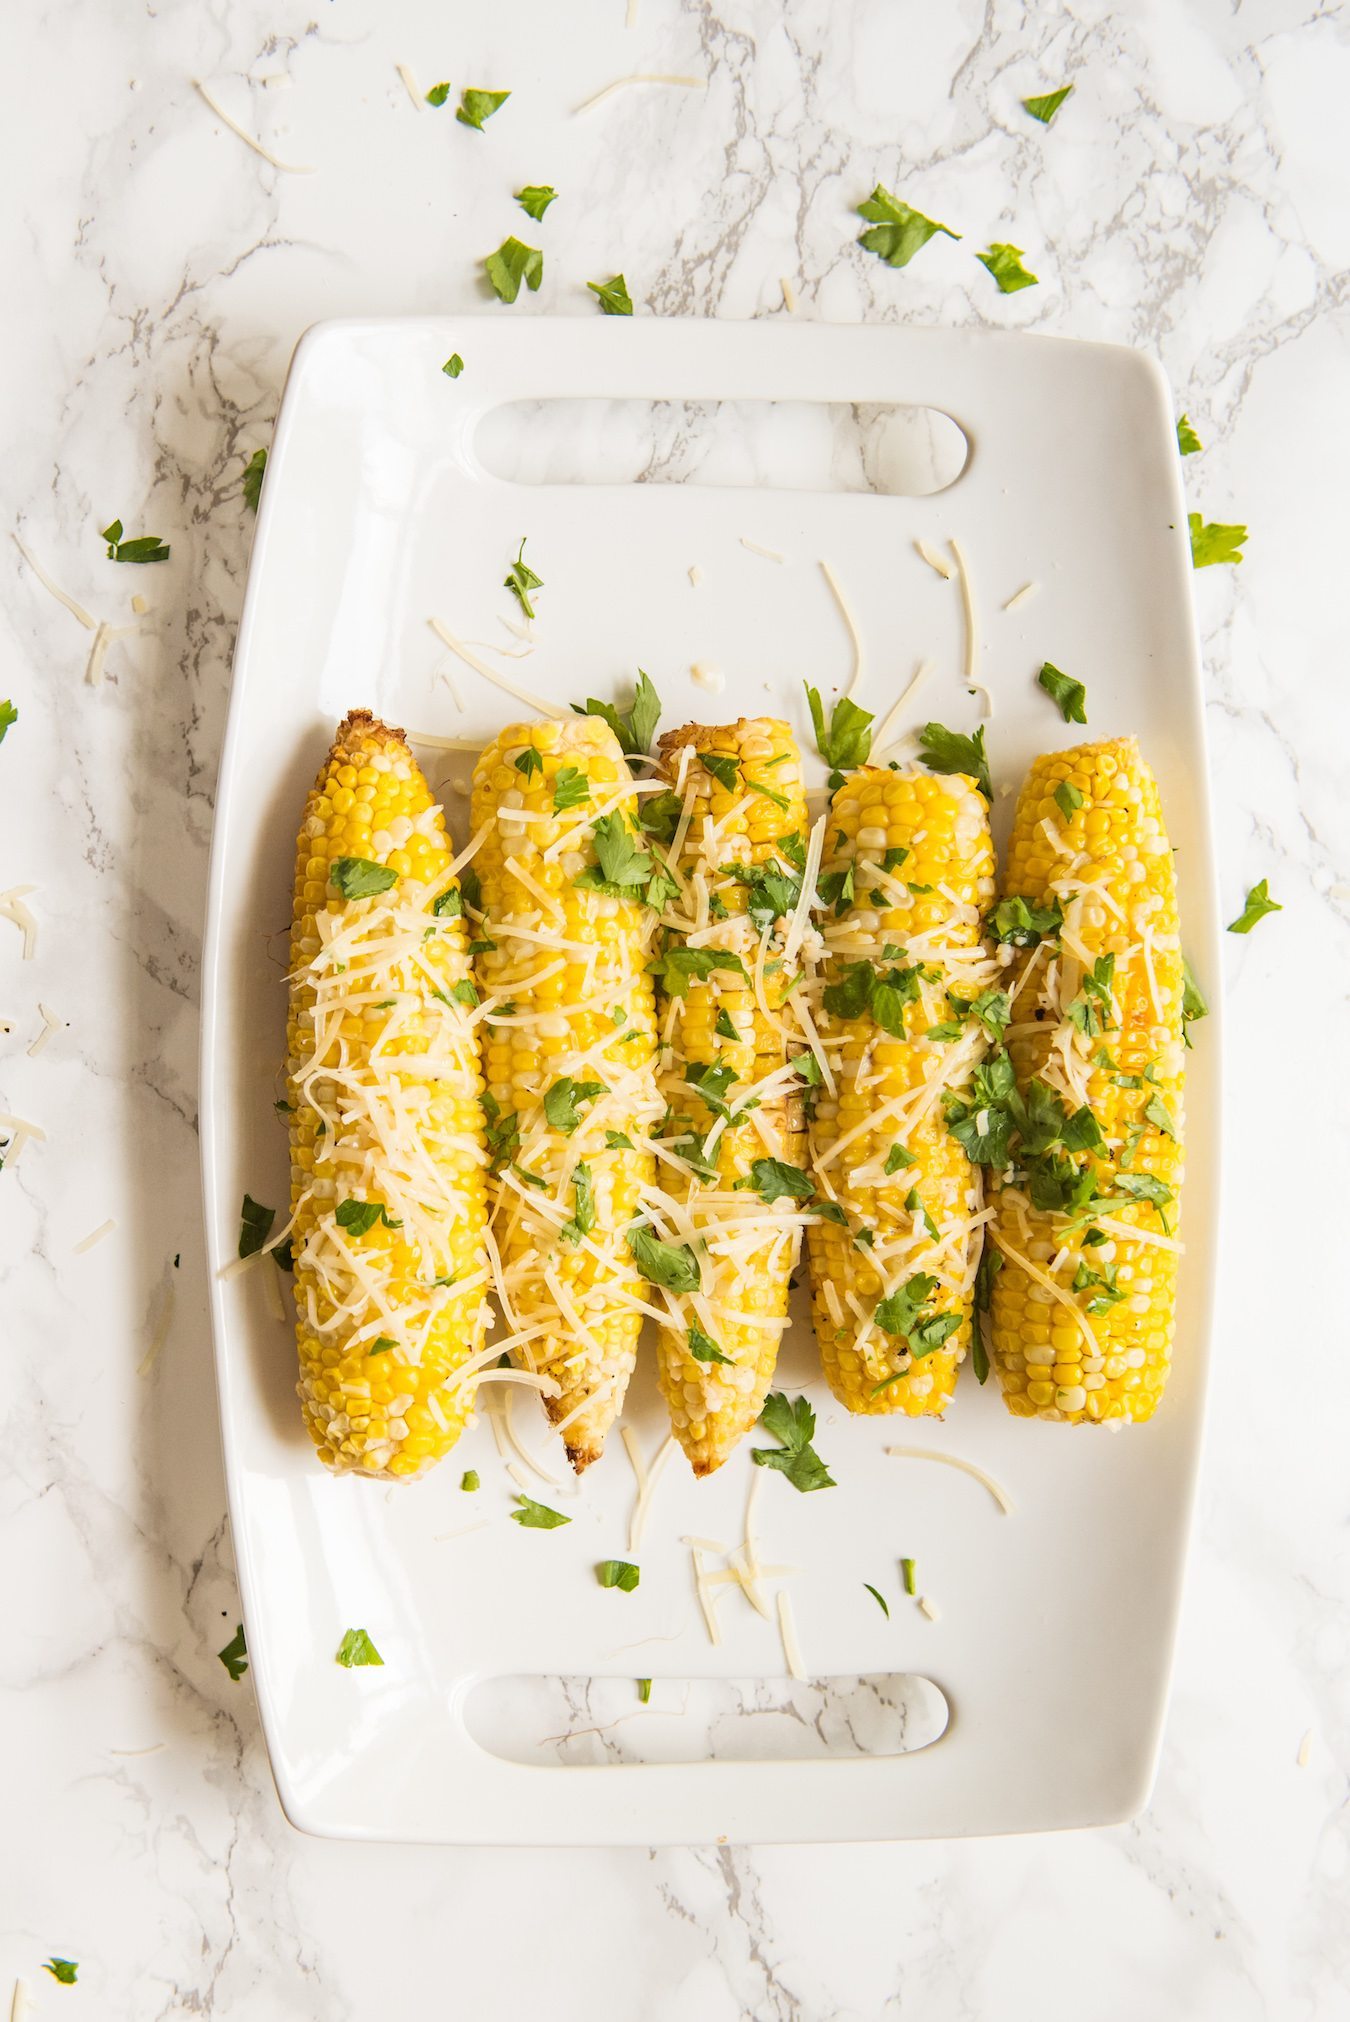 Garlic Parmesan Grilled Corn Recipe | Party recipes, entertaining tips, party ideas and more from @cydconverse